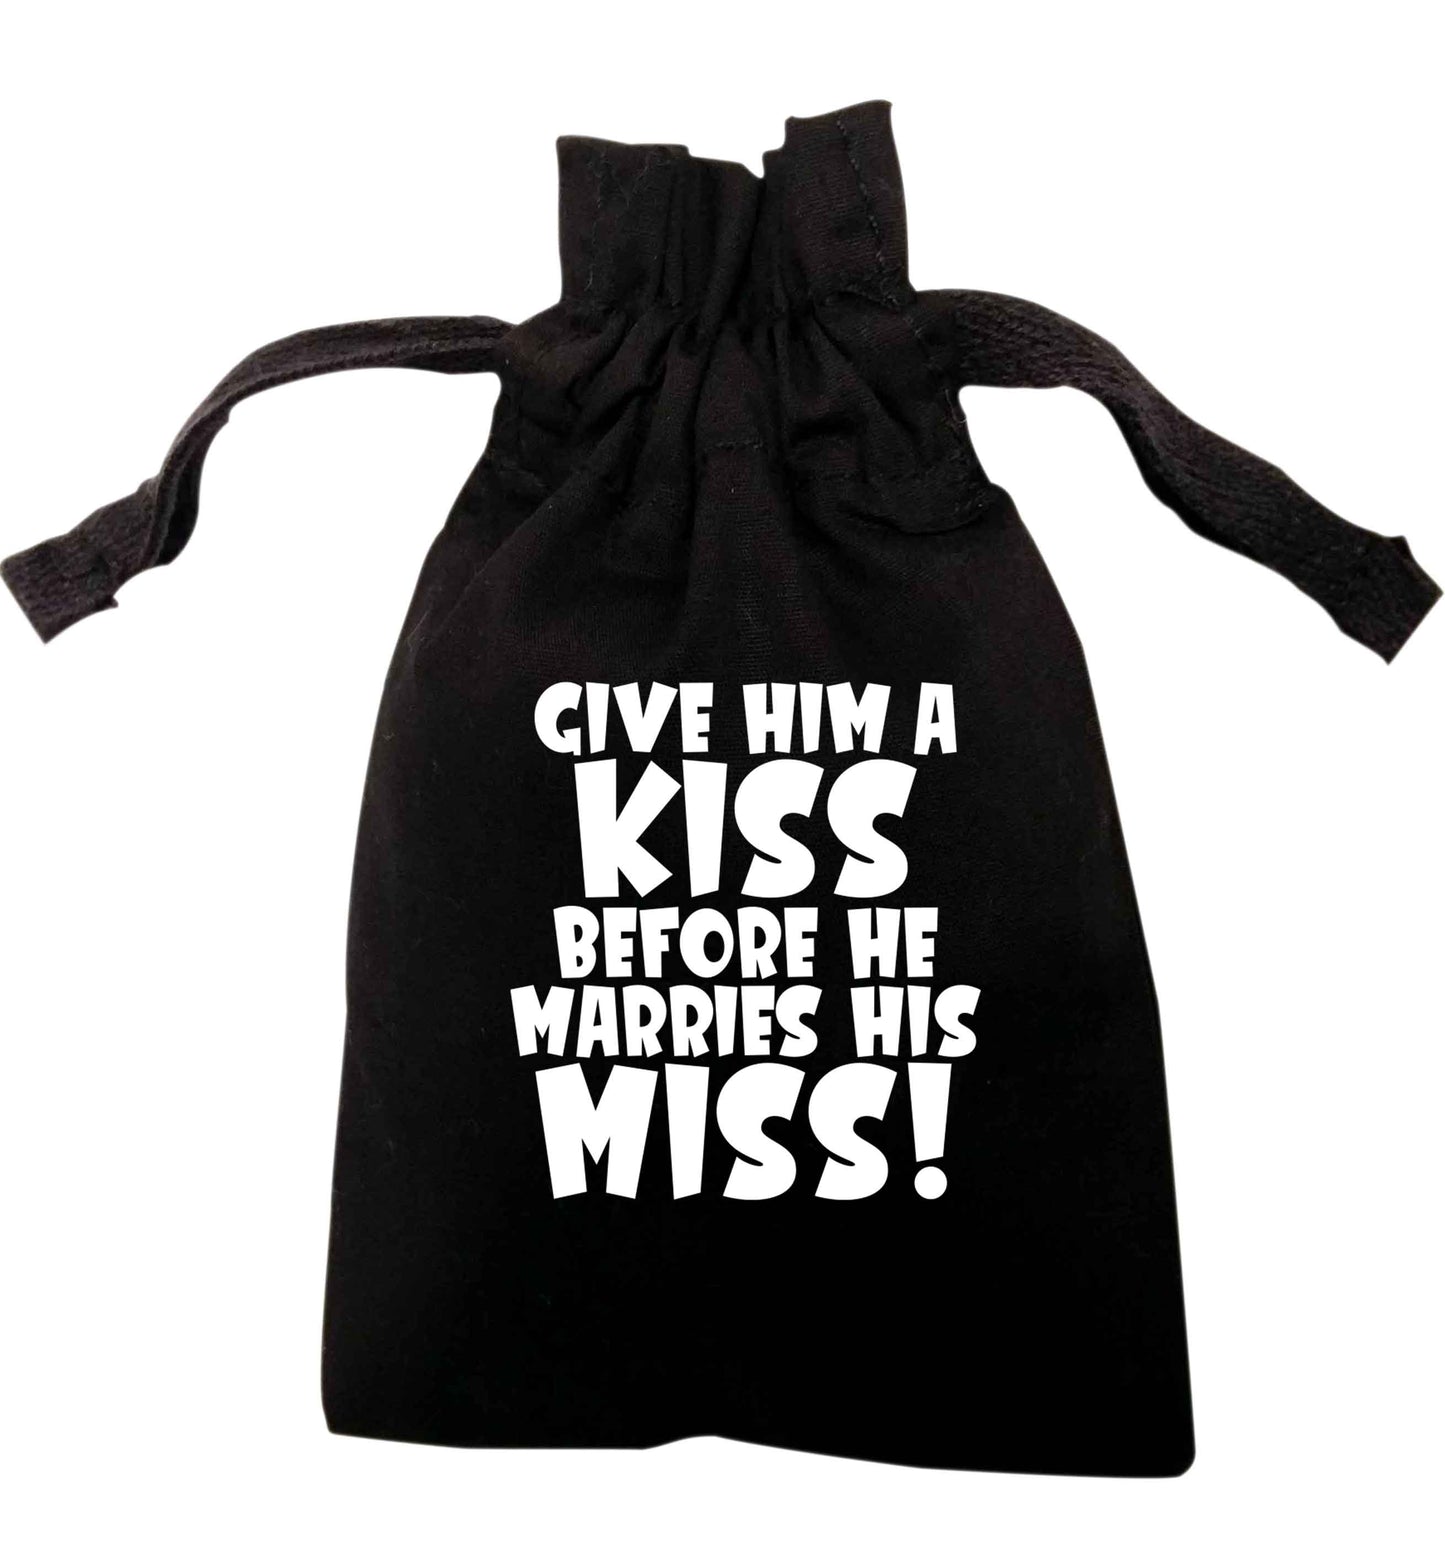 Give him a kiss before he marries his miss | XS - L | Pouch / Drawstring bag / Sack | Organic Cotton | Bulk discounts available!